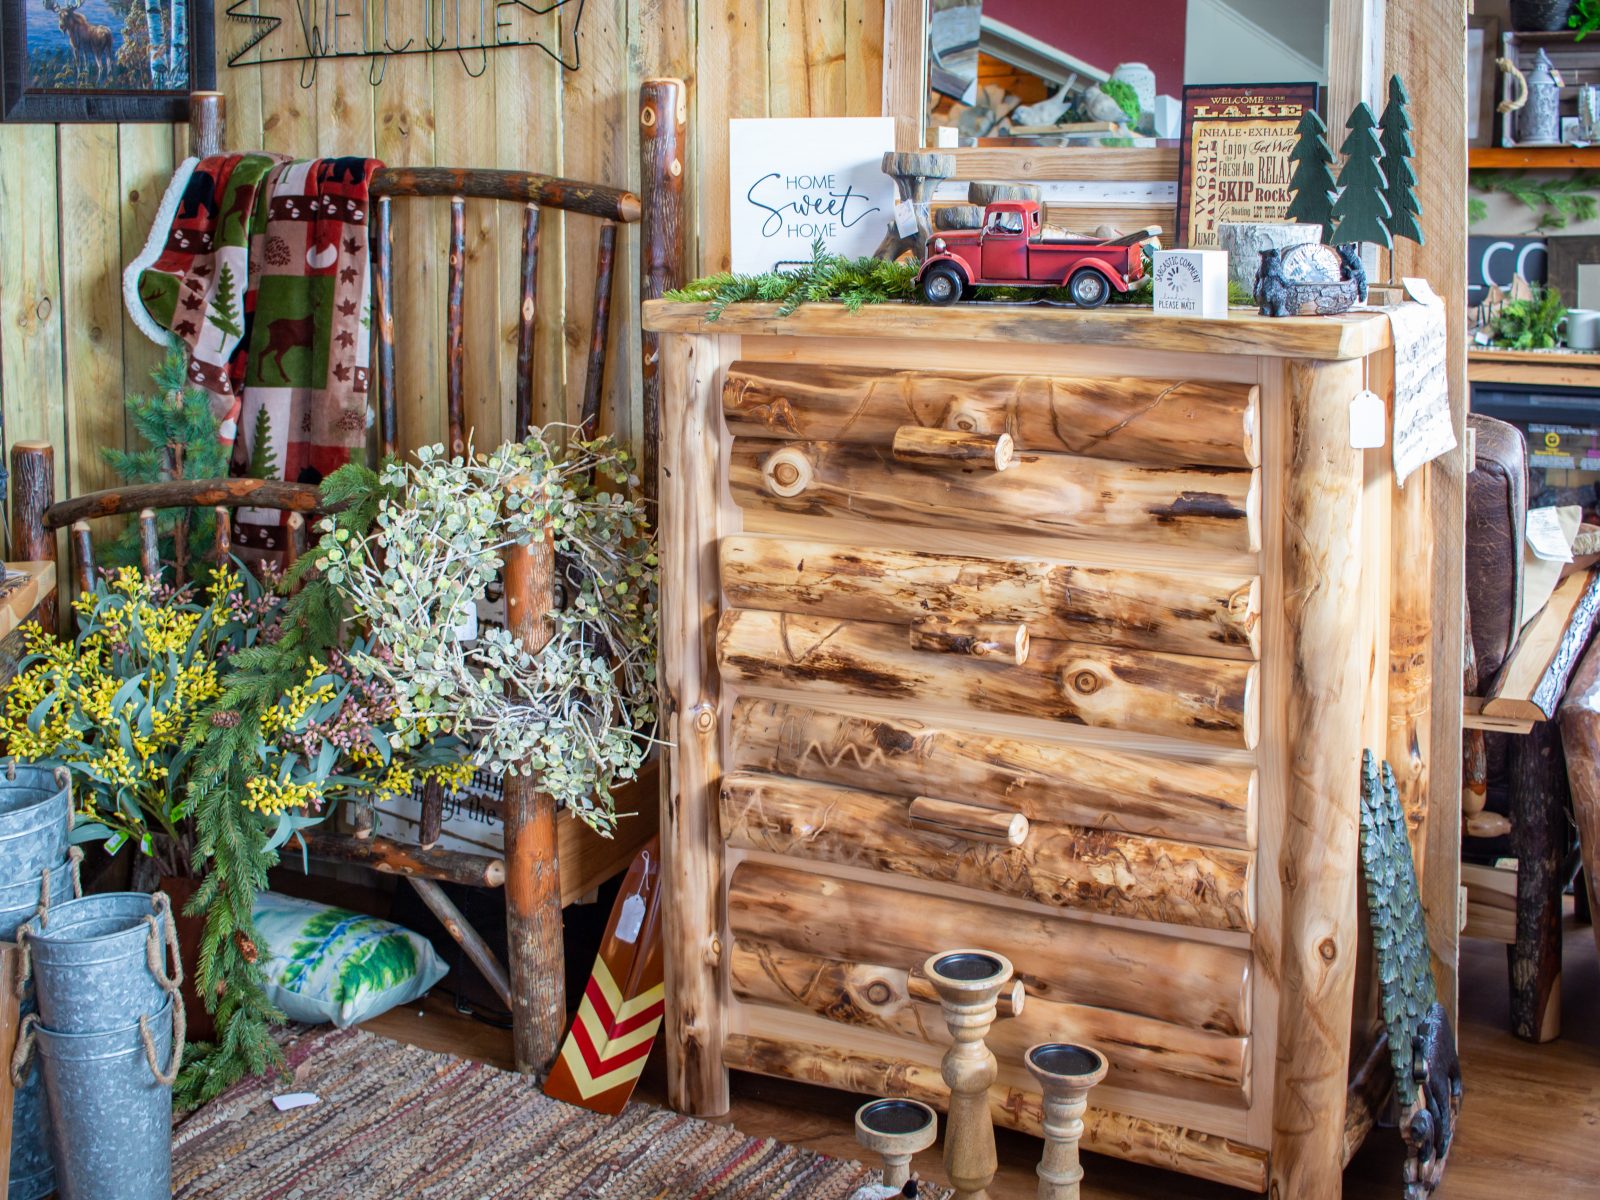 The Best Places to Buy Traditional Rustic Cabin Furniture Online